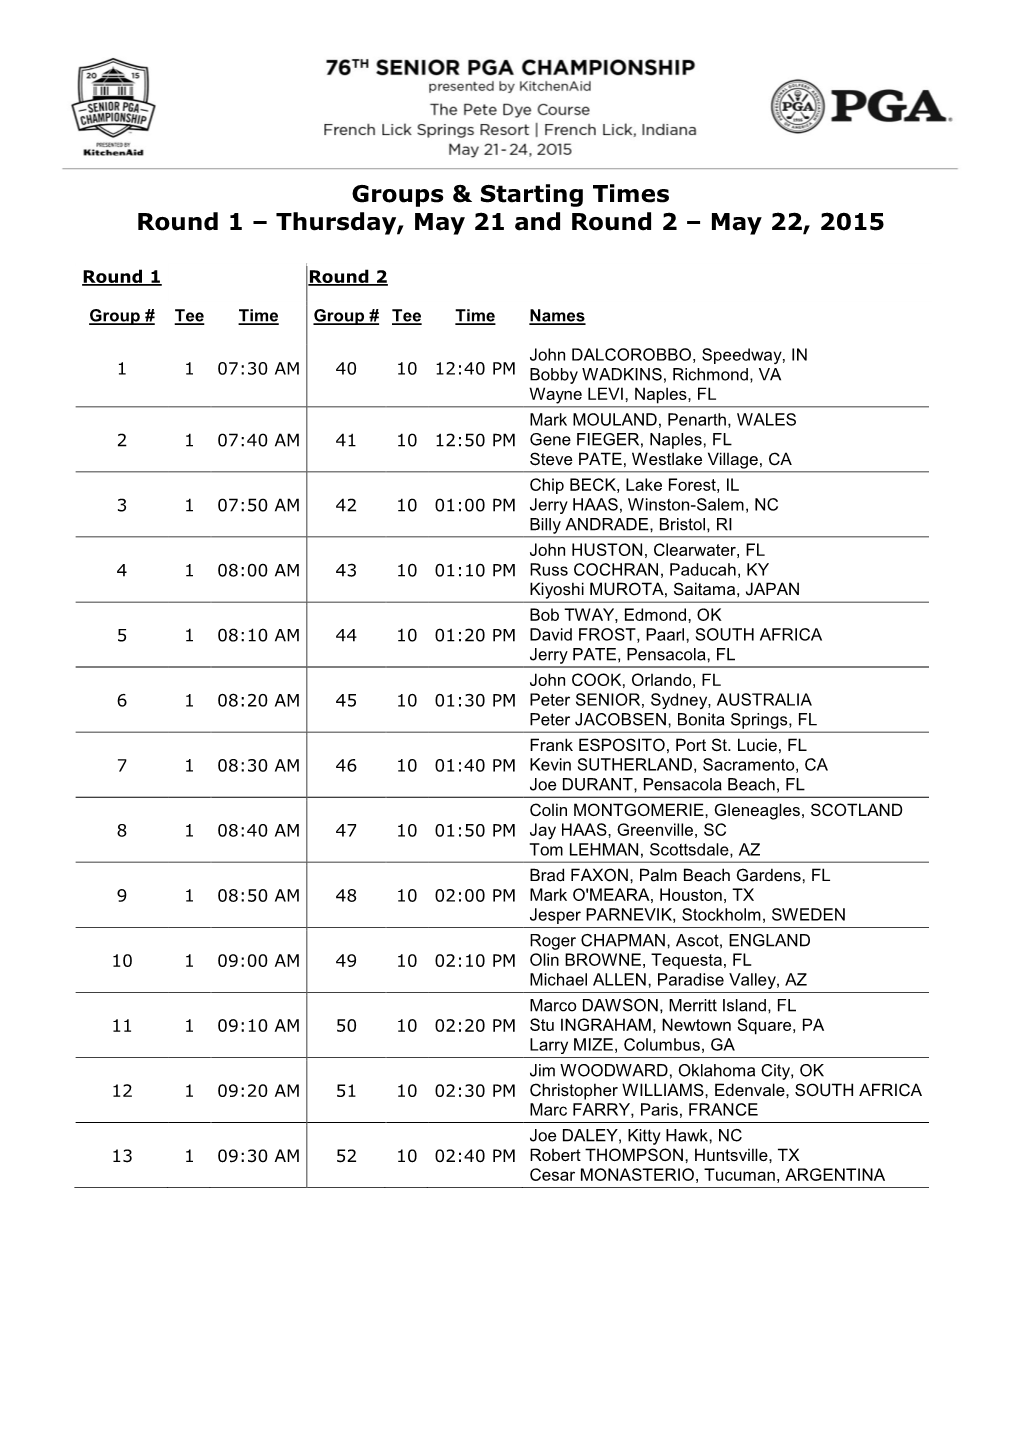 Groups & Starting Times Round 1 – Thursday, May 21 and Round 2